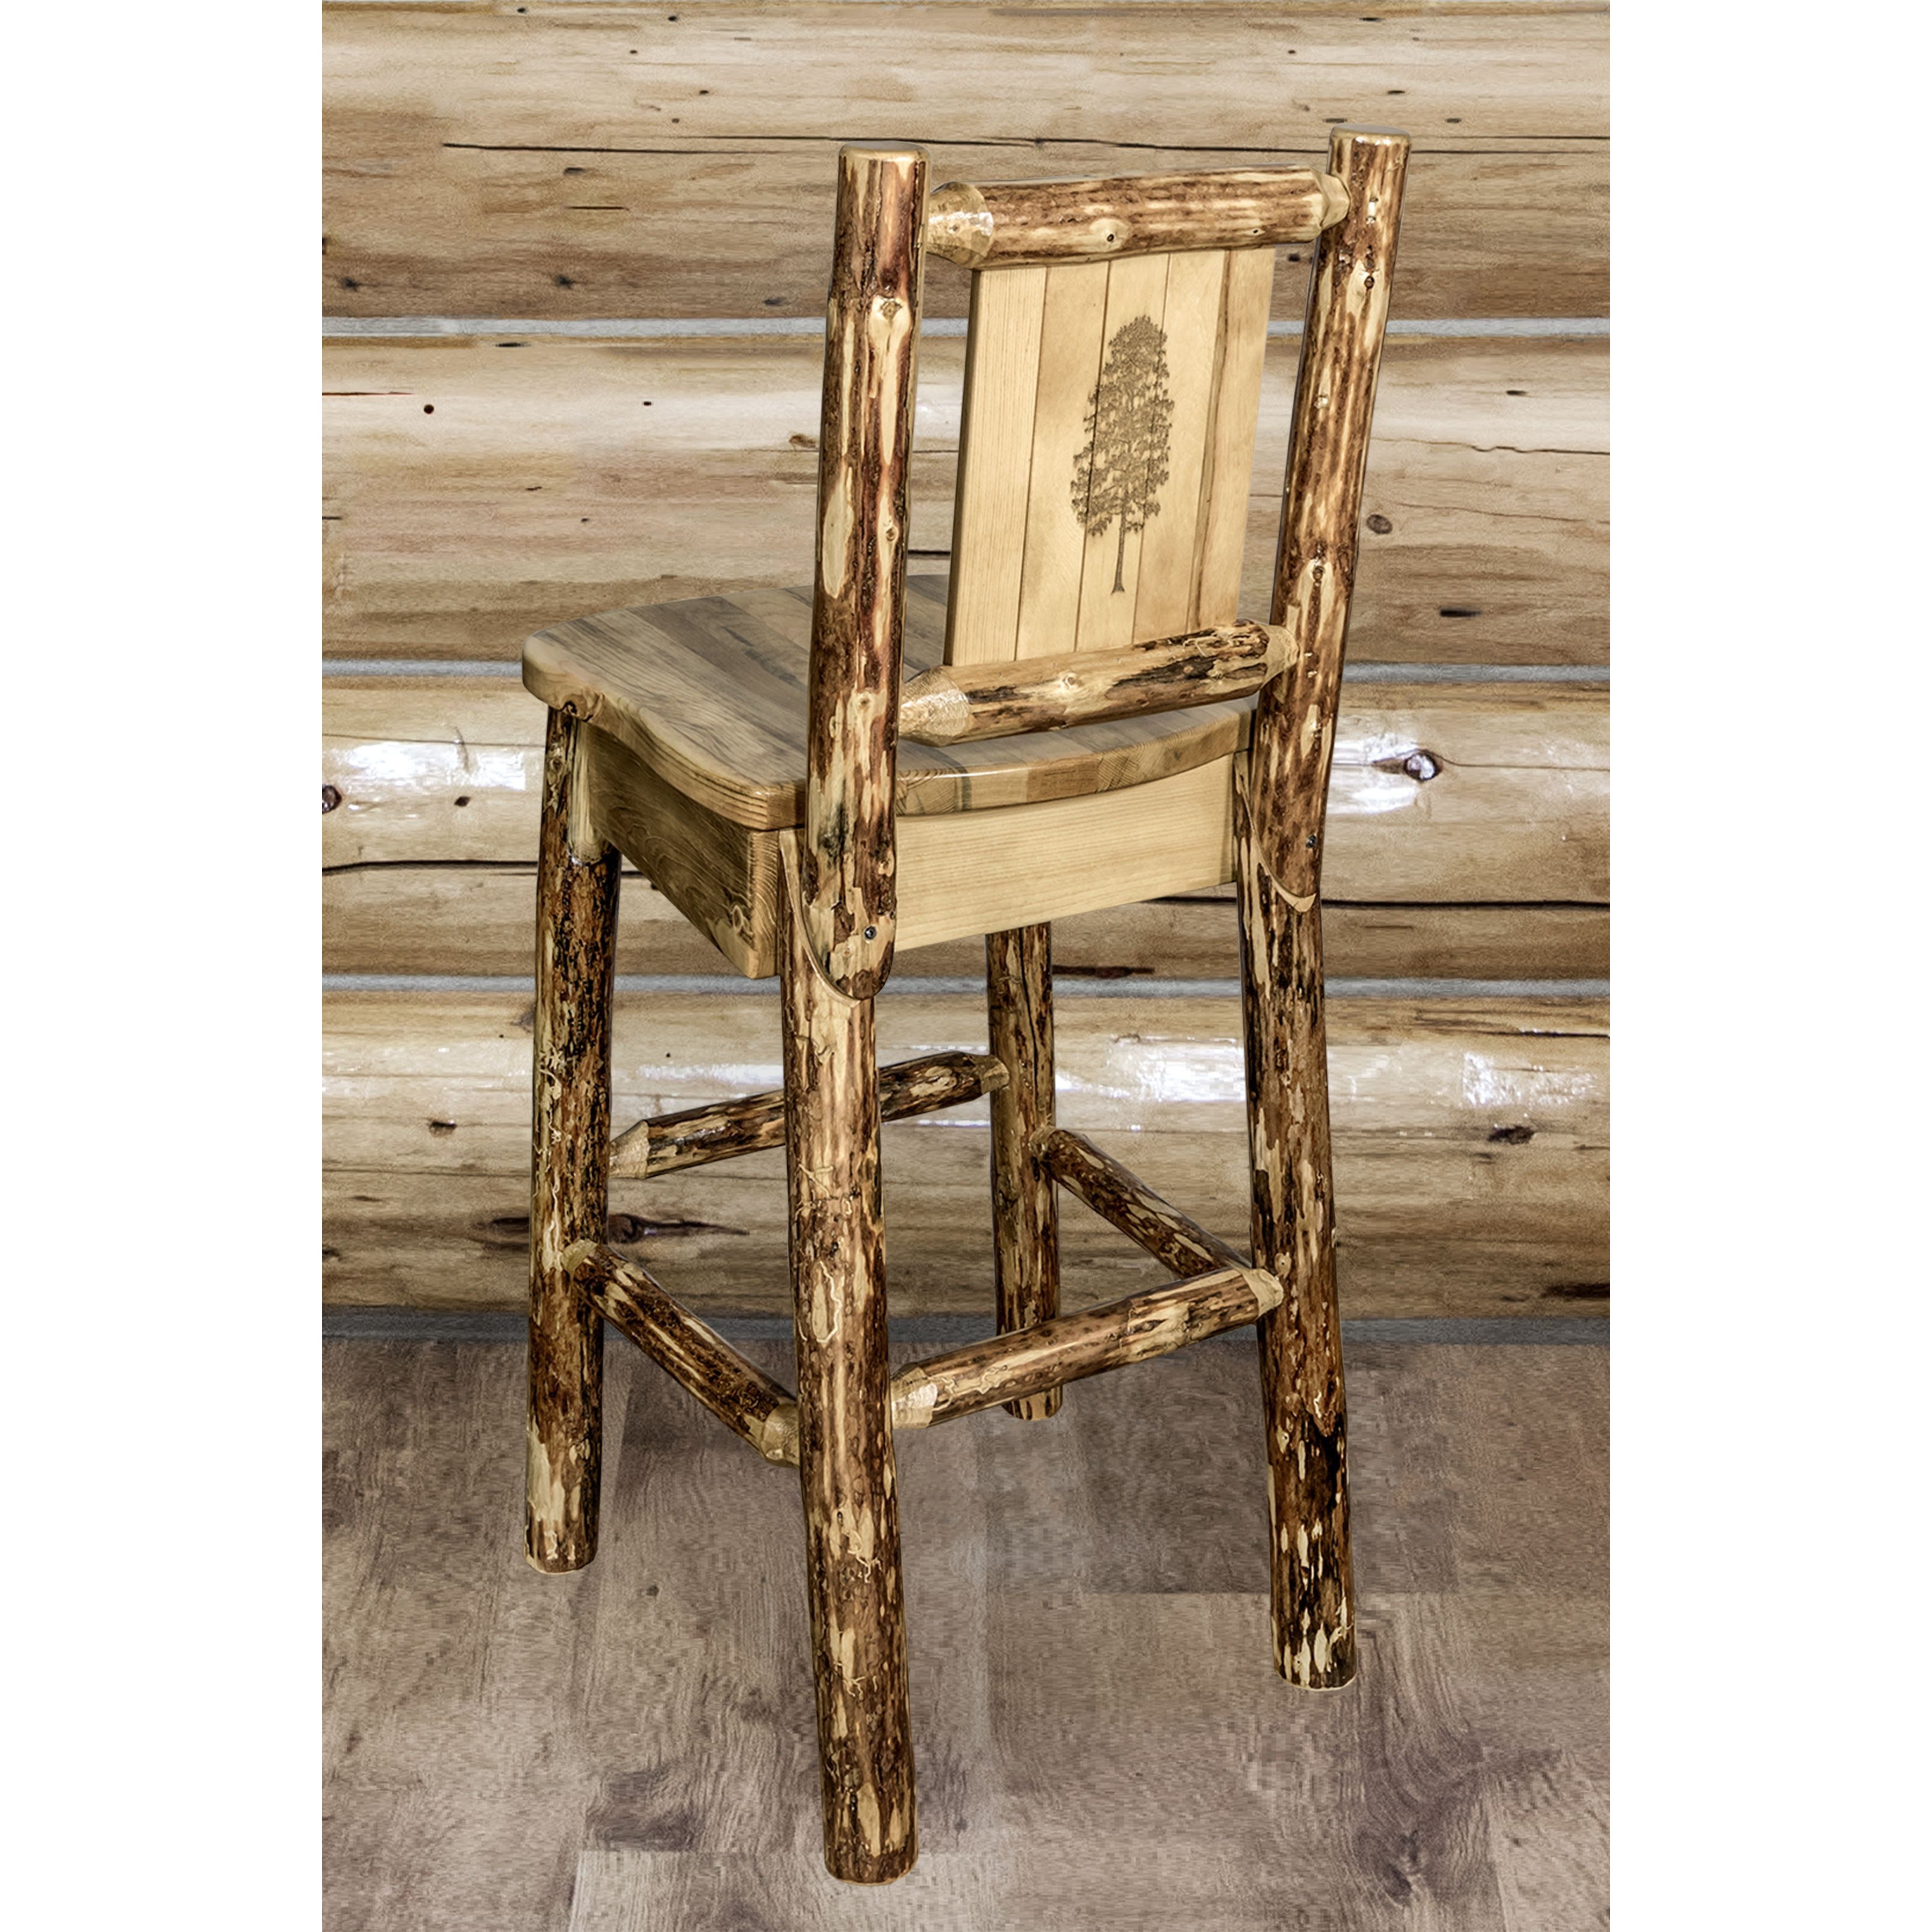 Montana Glacier Country MWGCBSWNRLZPINE Barstool With Back and Laser Engraved Pine Tree Design